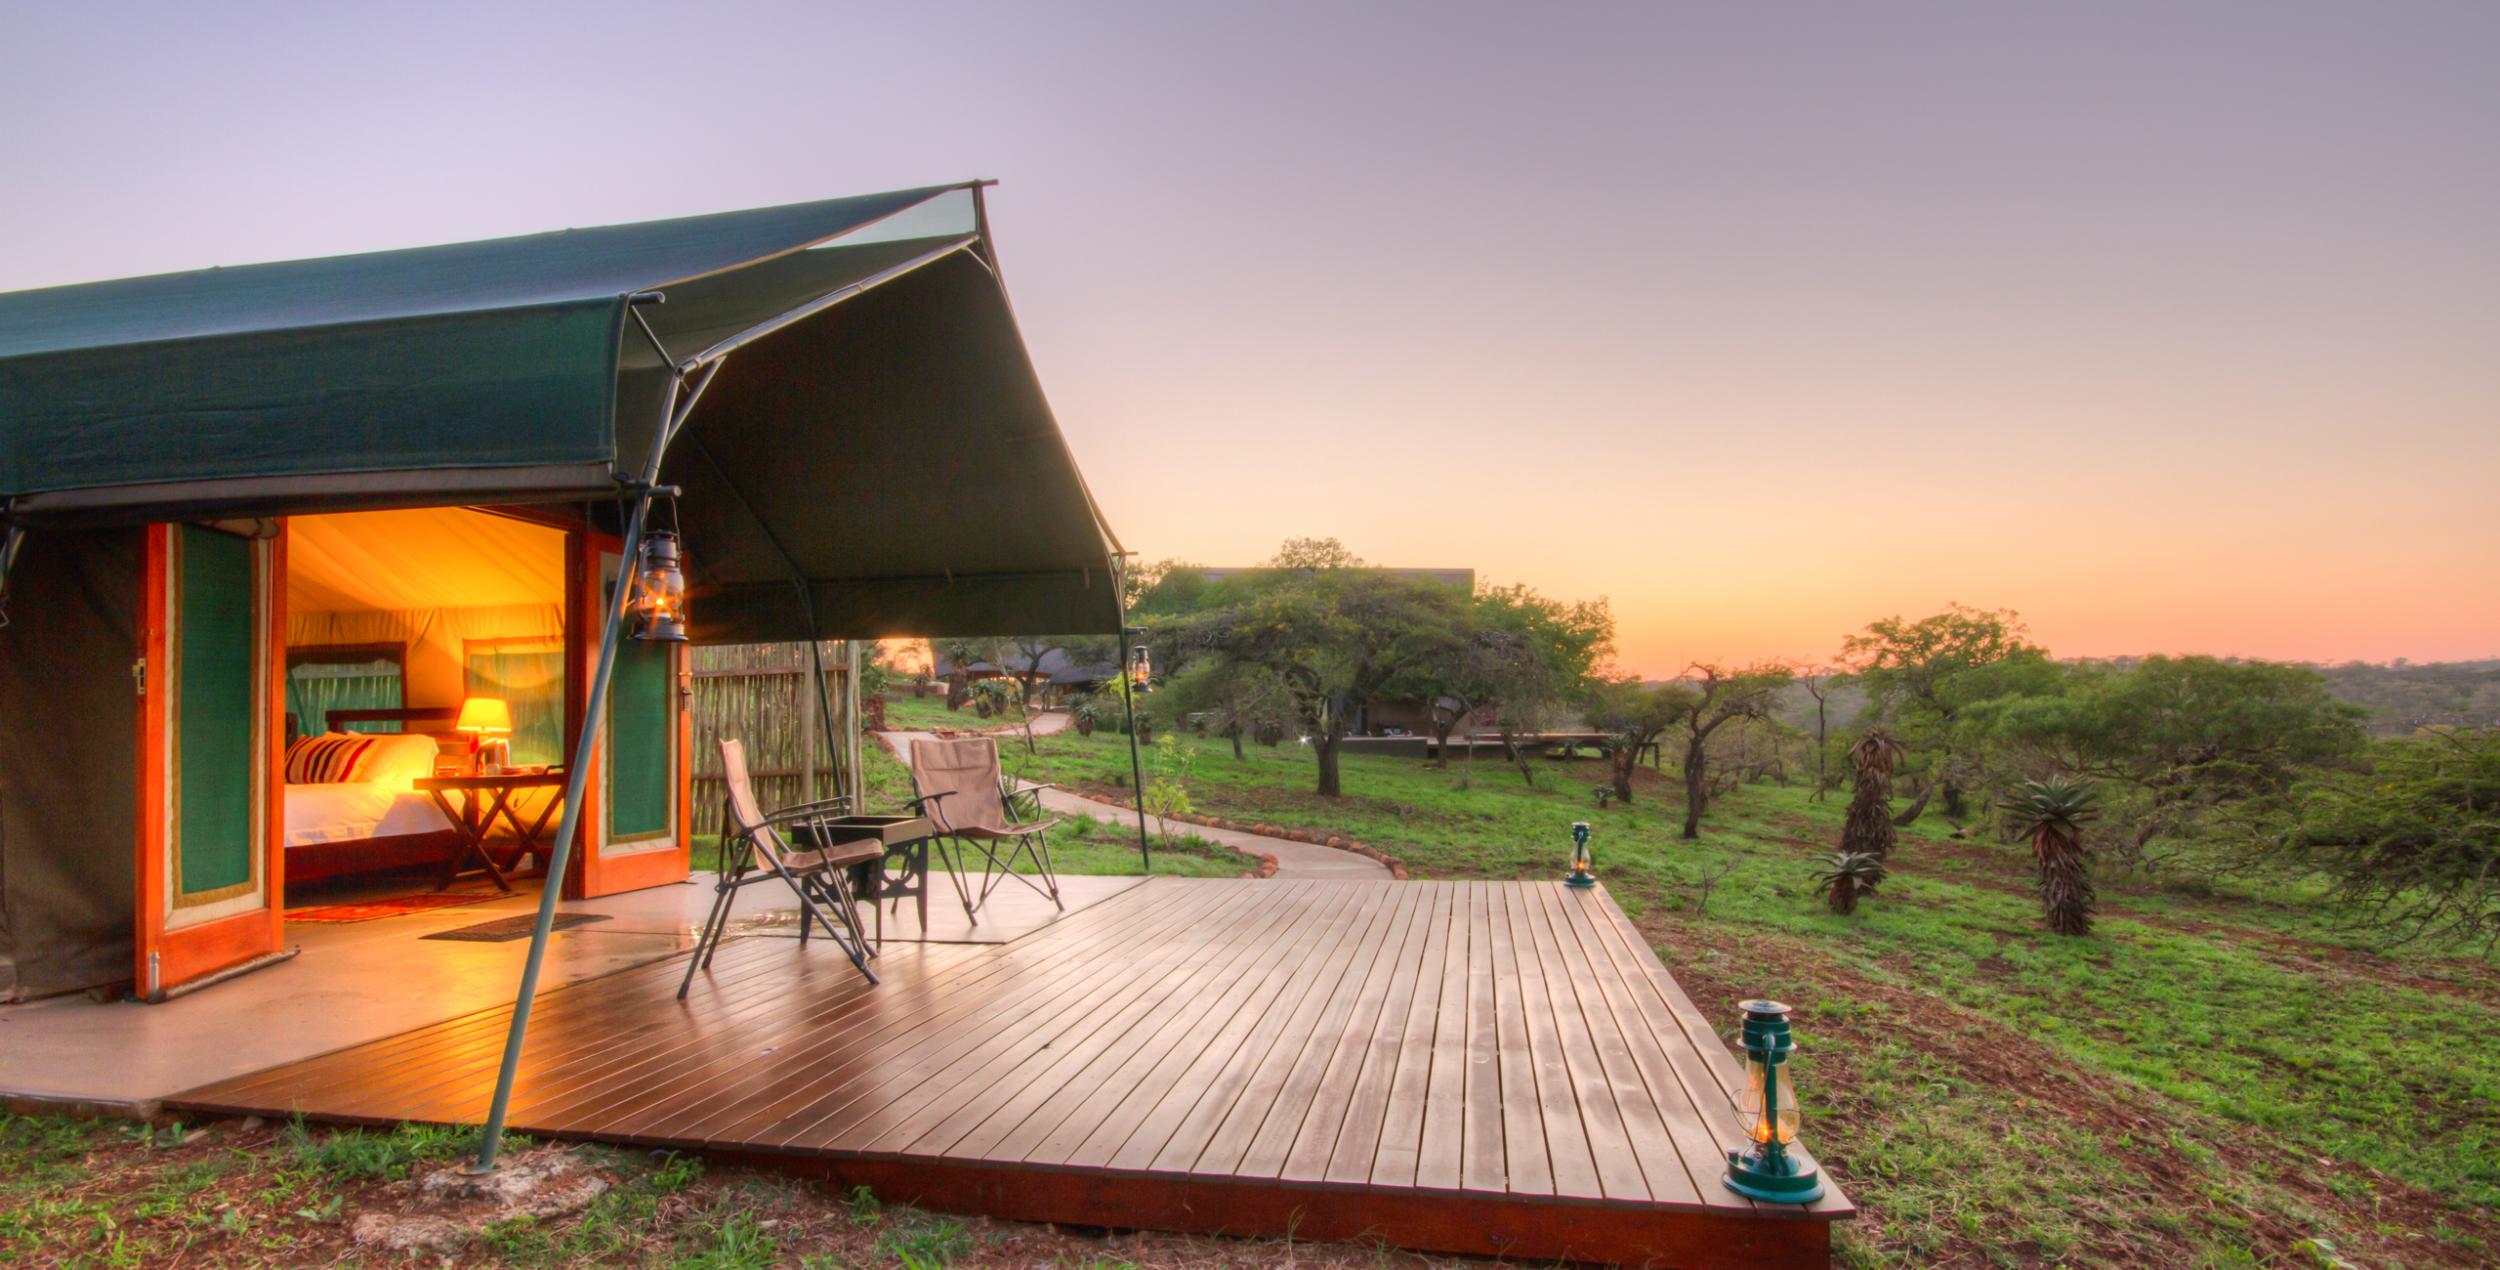 Mavela Game Lodge is a great-value private reserve